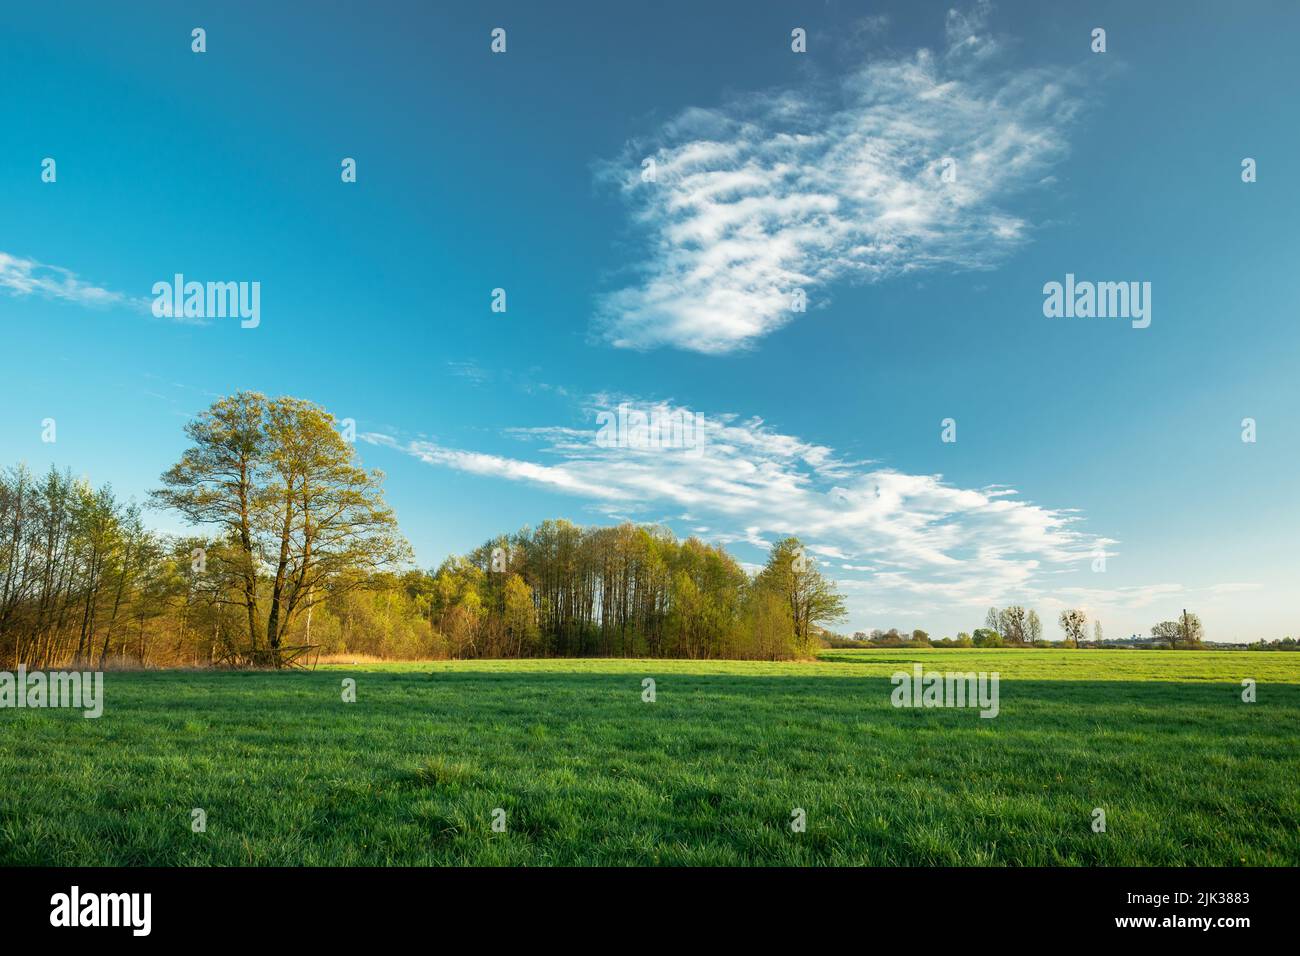 A copse behind a meadow and white clouds on a blue sky Stock Photo